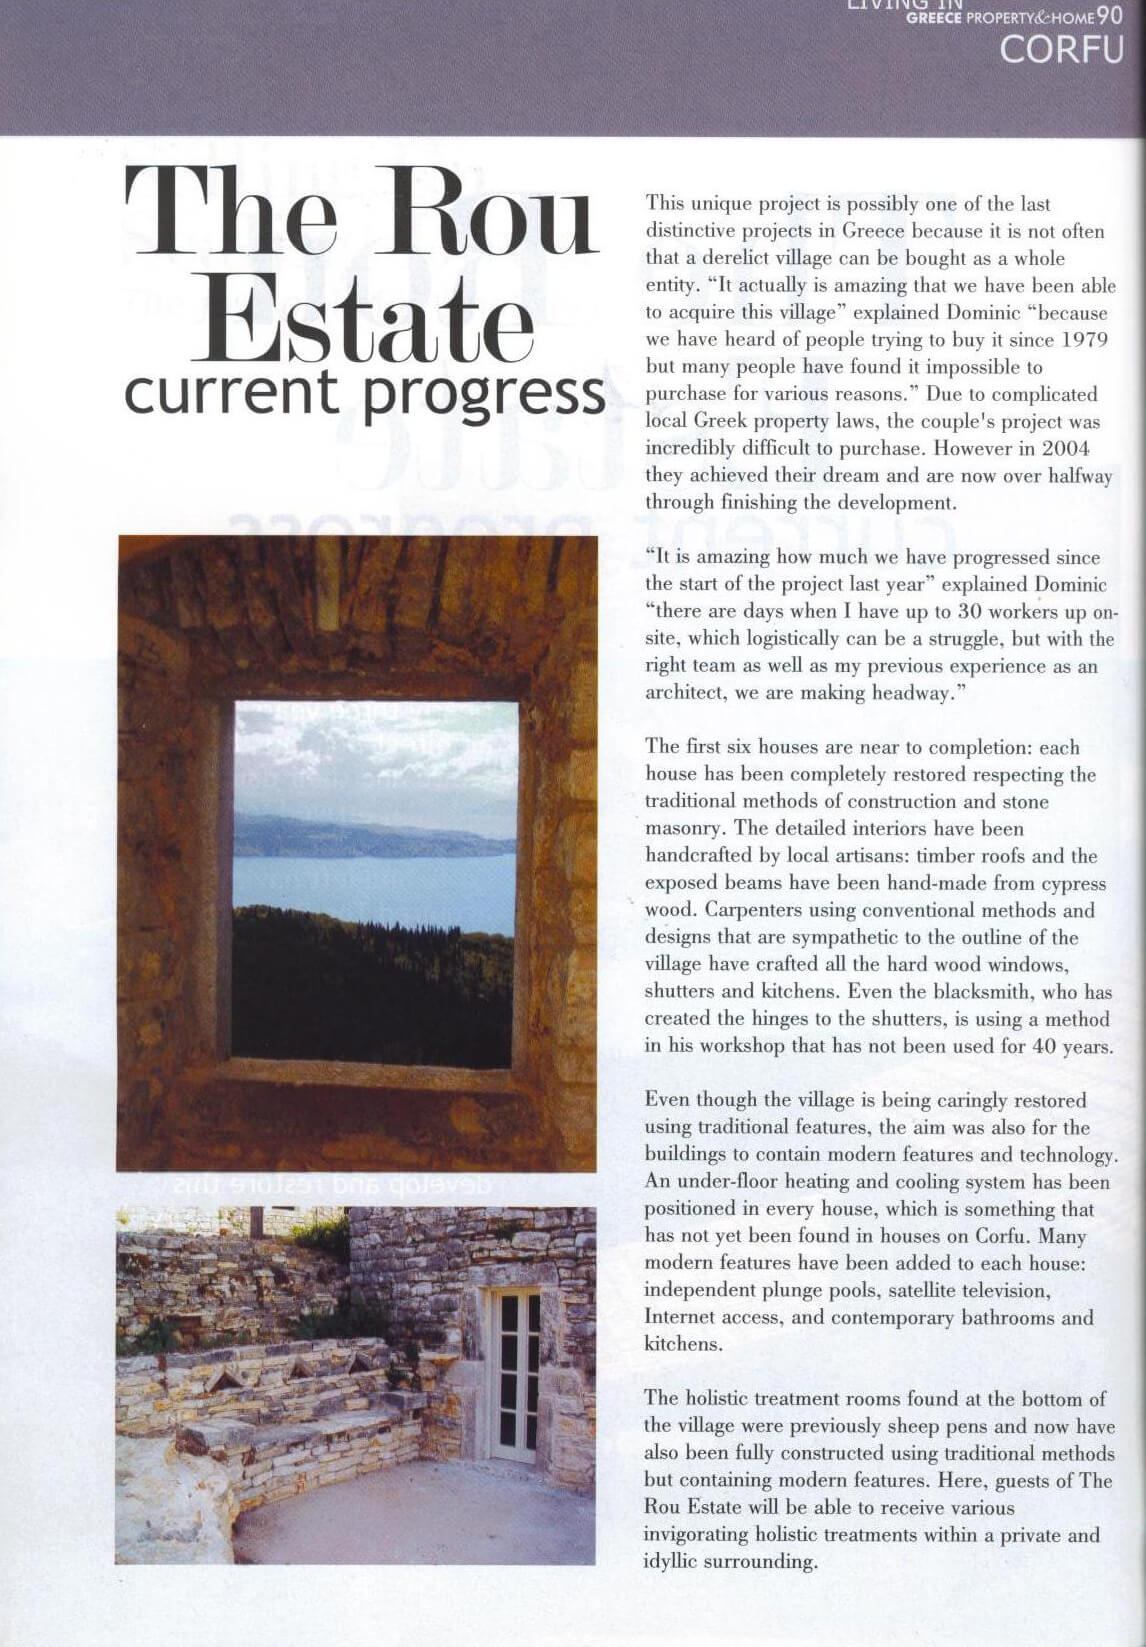 2006_ROU ESTATE_property&home greece_issue 26_pg 01